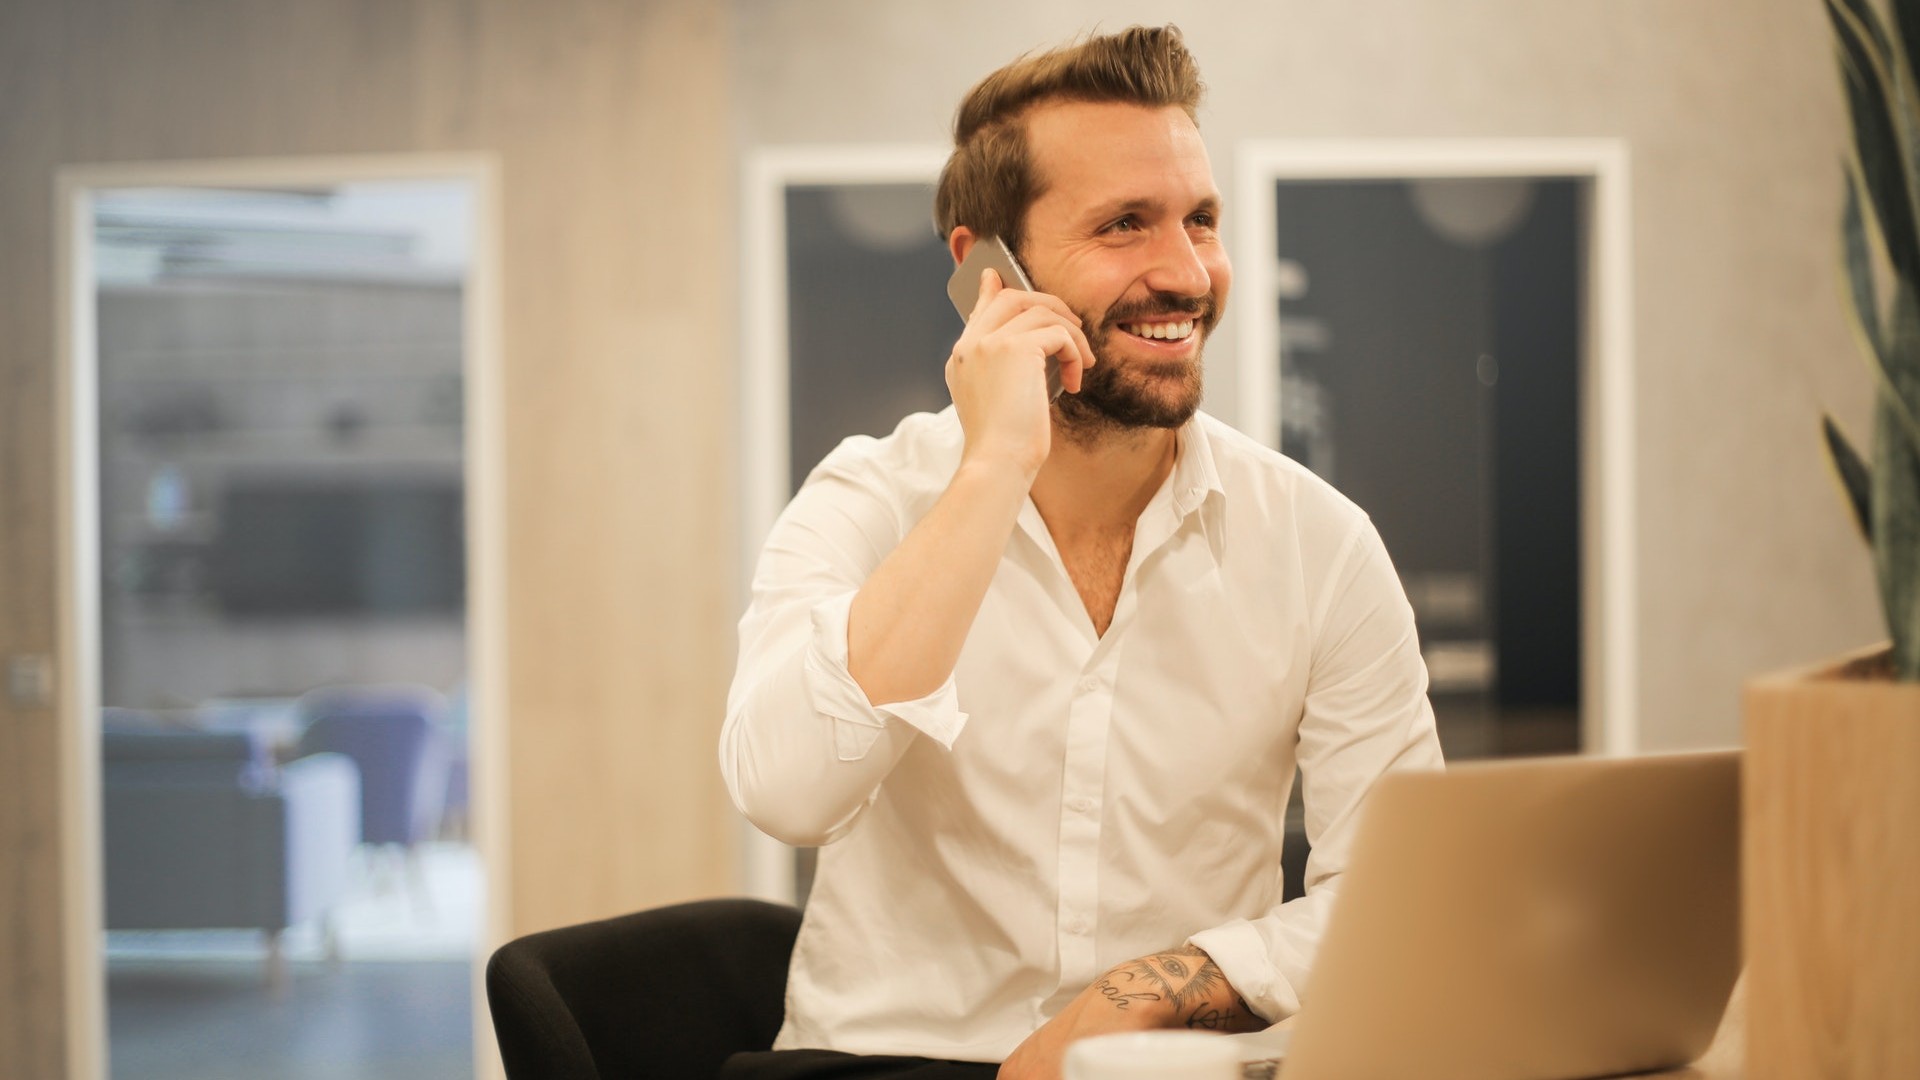 Smiling man talking on the phone in the office